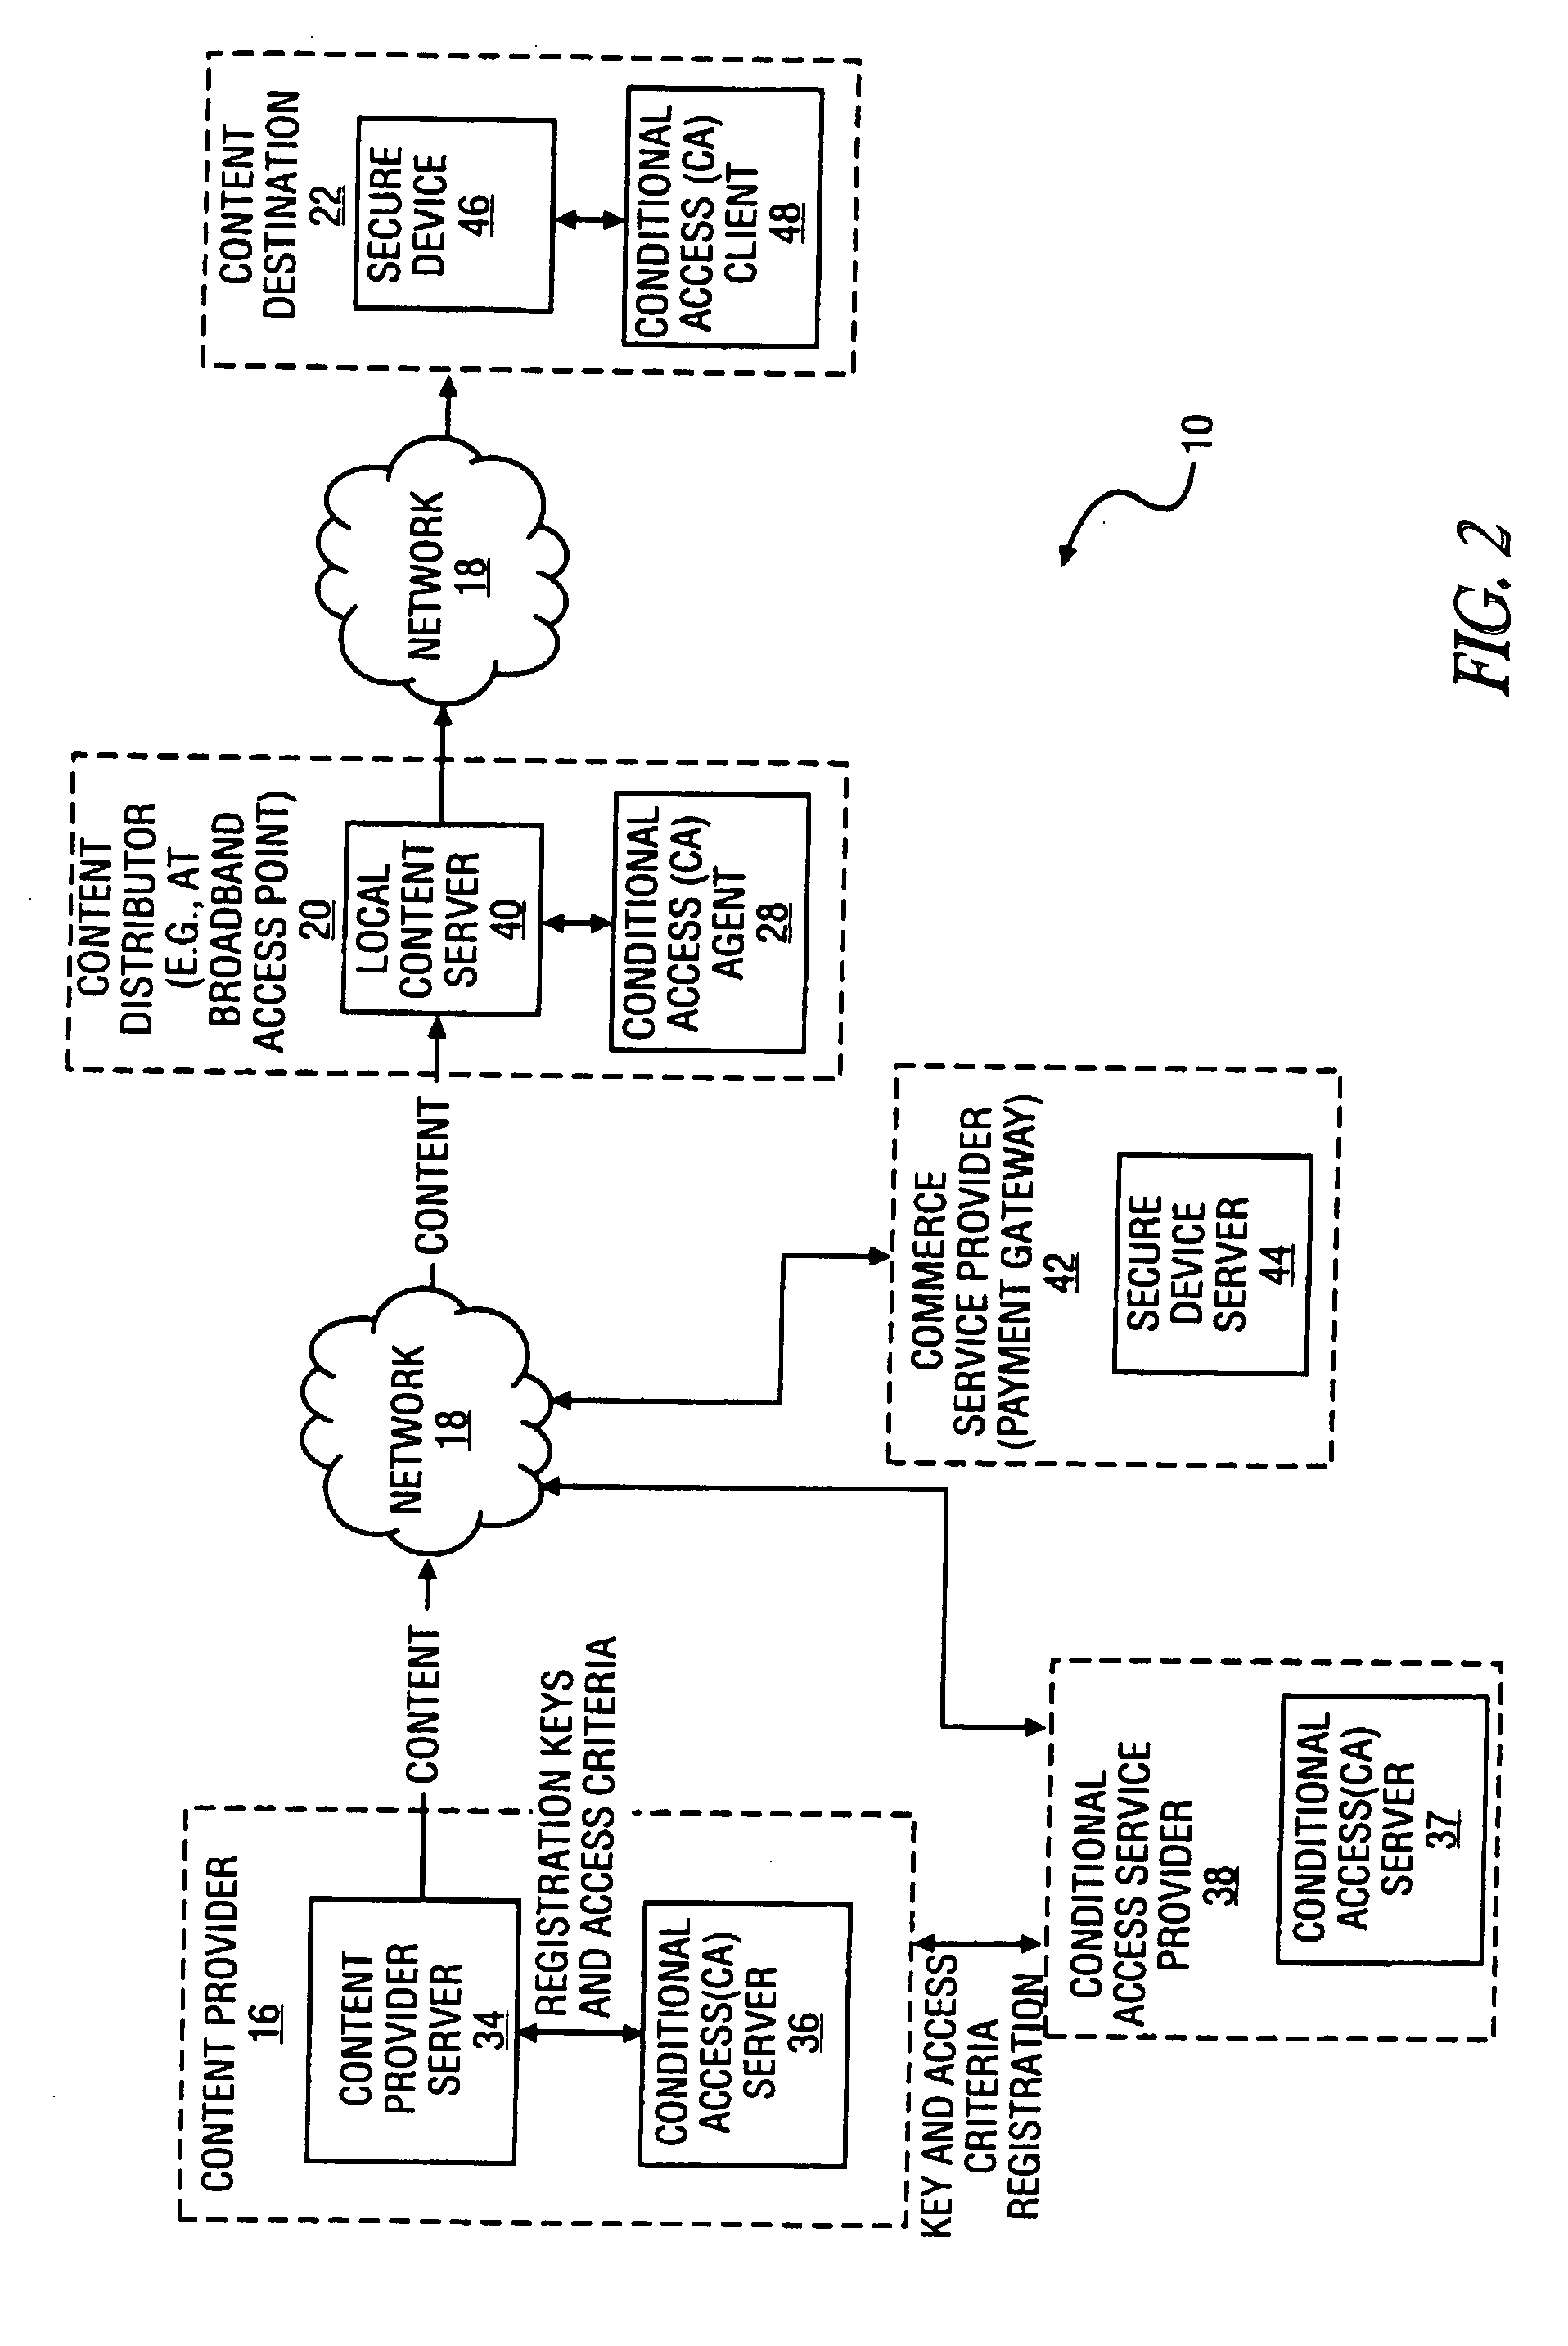 Method and system to dynamically present a payment gateway for content distributed via a network